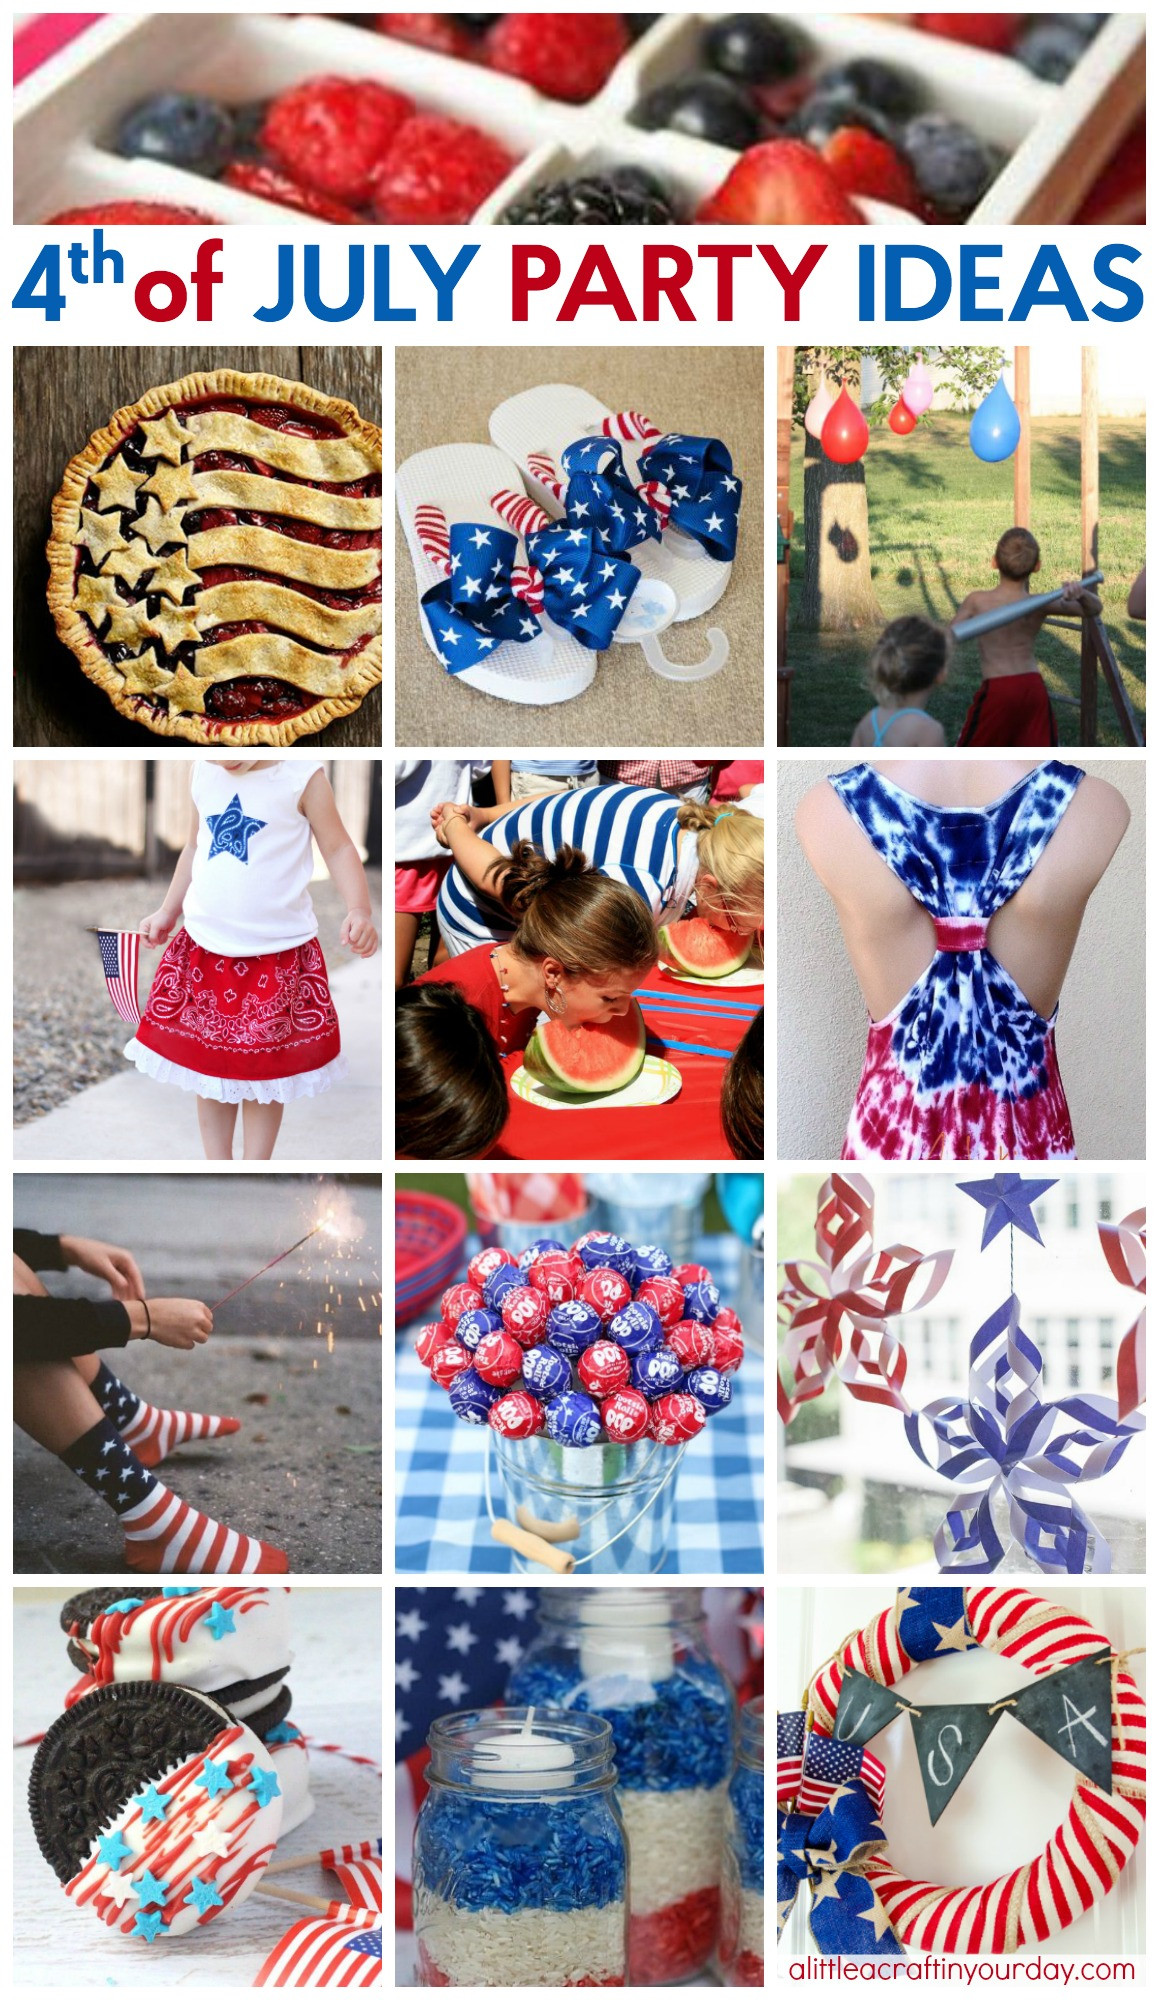 4th Of July Picture Ideas
 44 Way Cool Fourth of July Party Ideas A Little Craft In